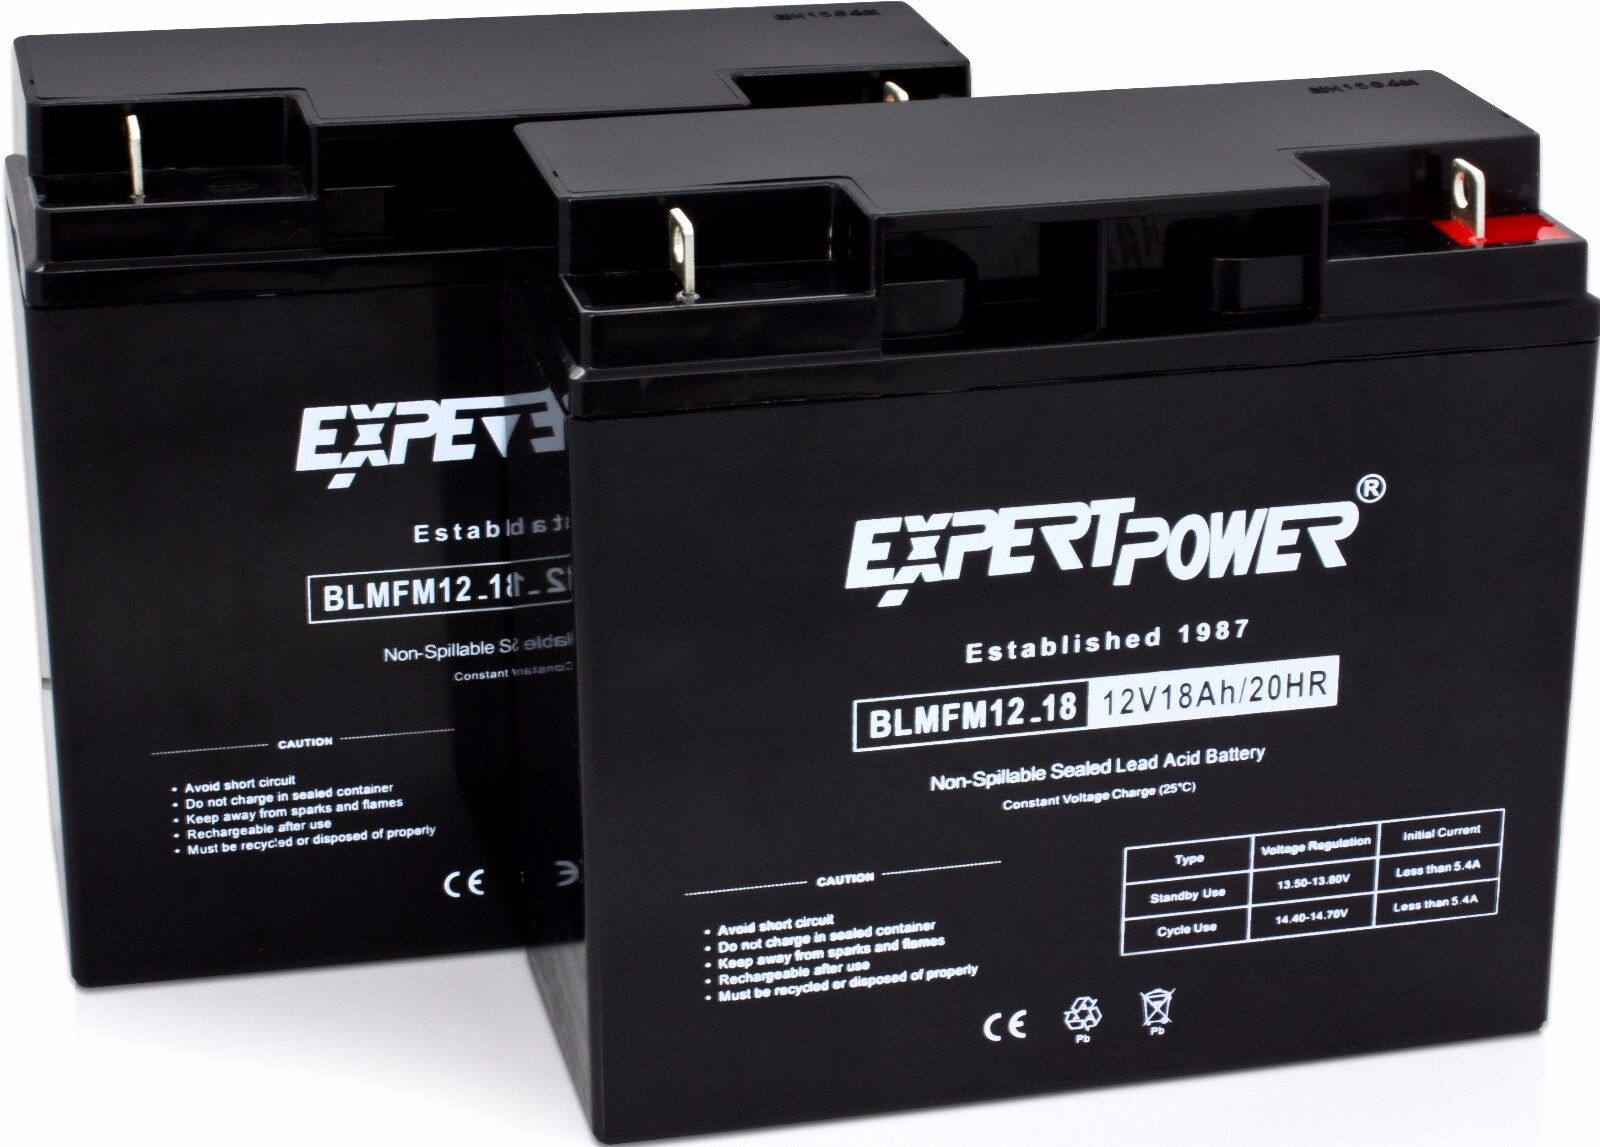 2 EXP12180 12V 18AH Battery for APC SmartUps 1400 1500 [Replacement for UB12180] ExpertPower EXP12180